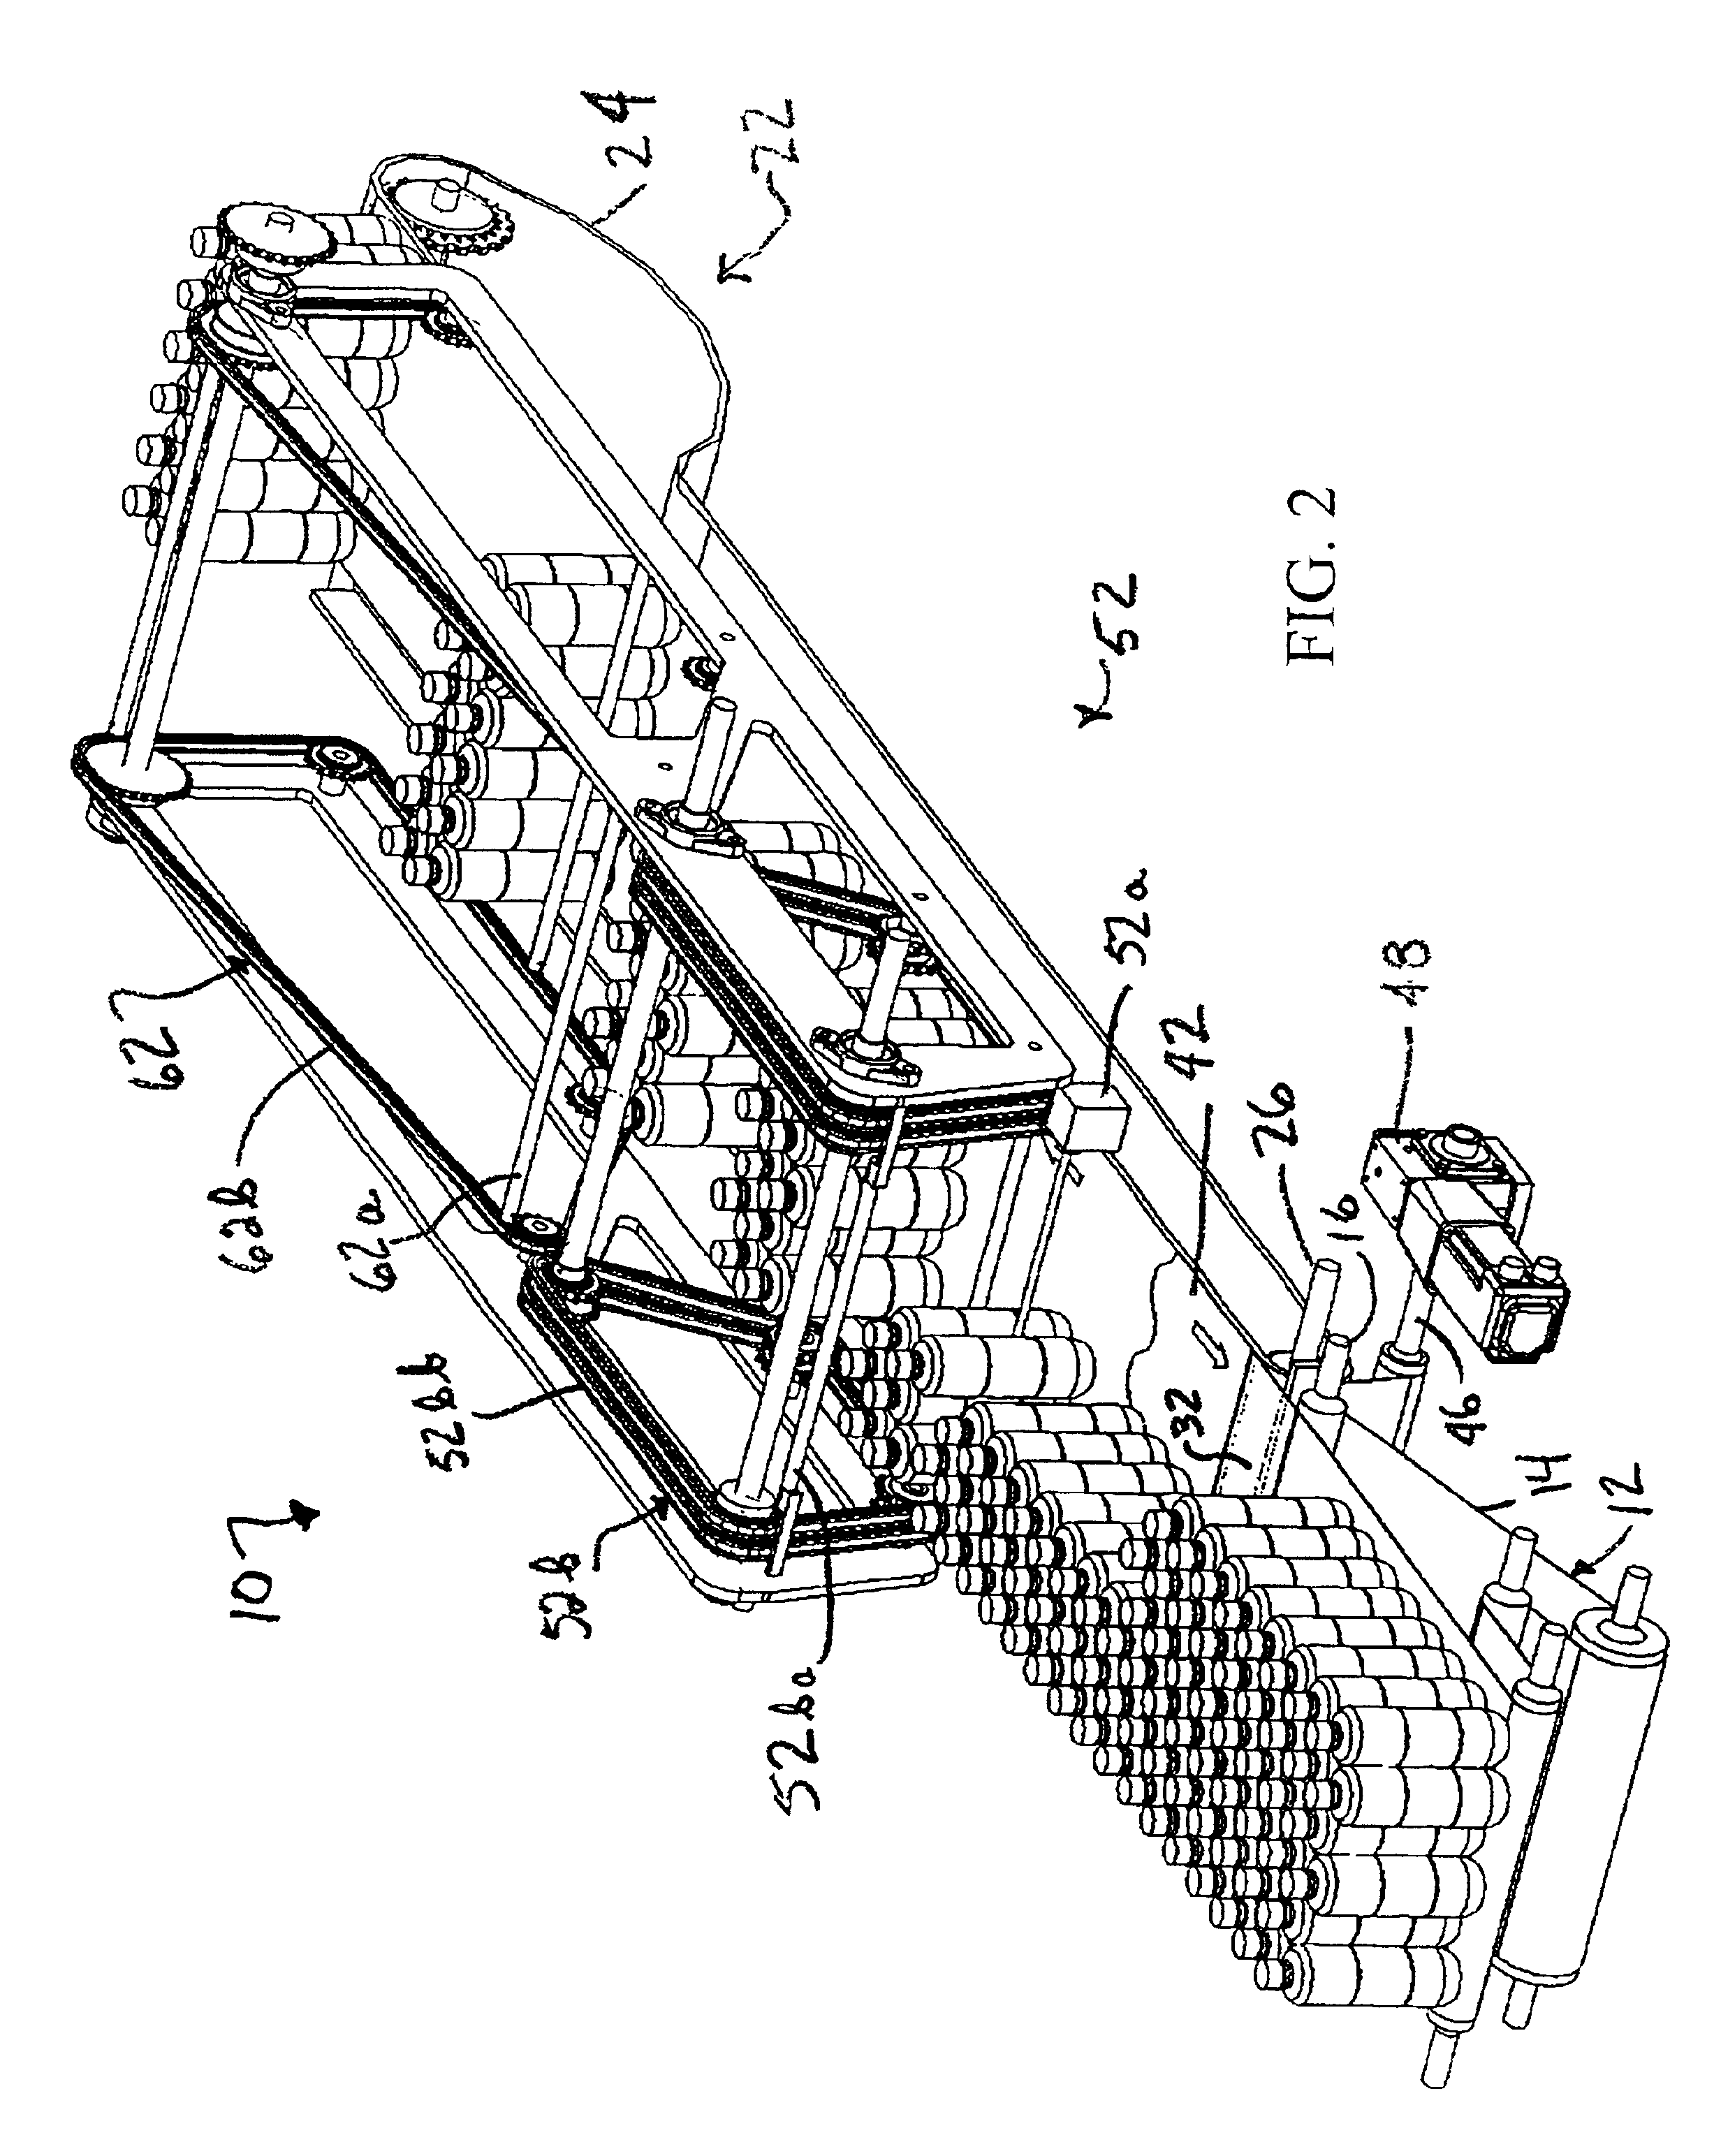 Retractable transfer device metering and product arranging apparatus and methods